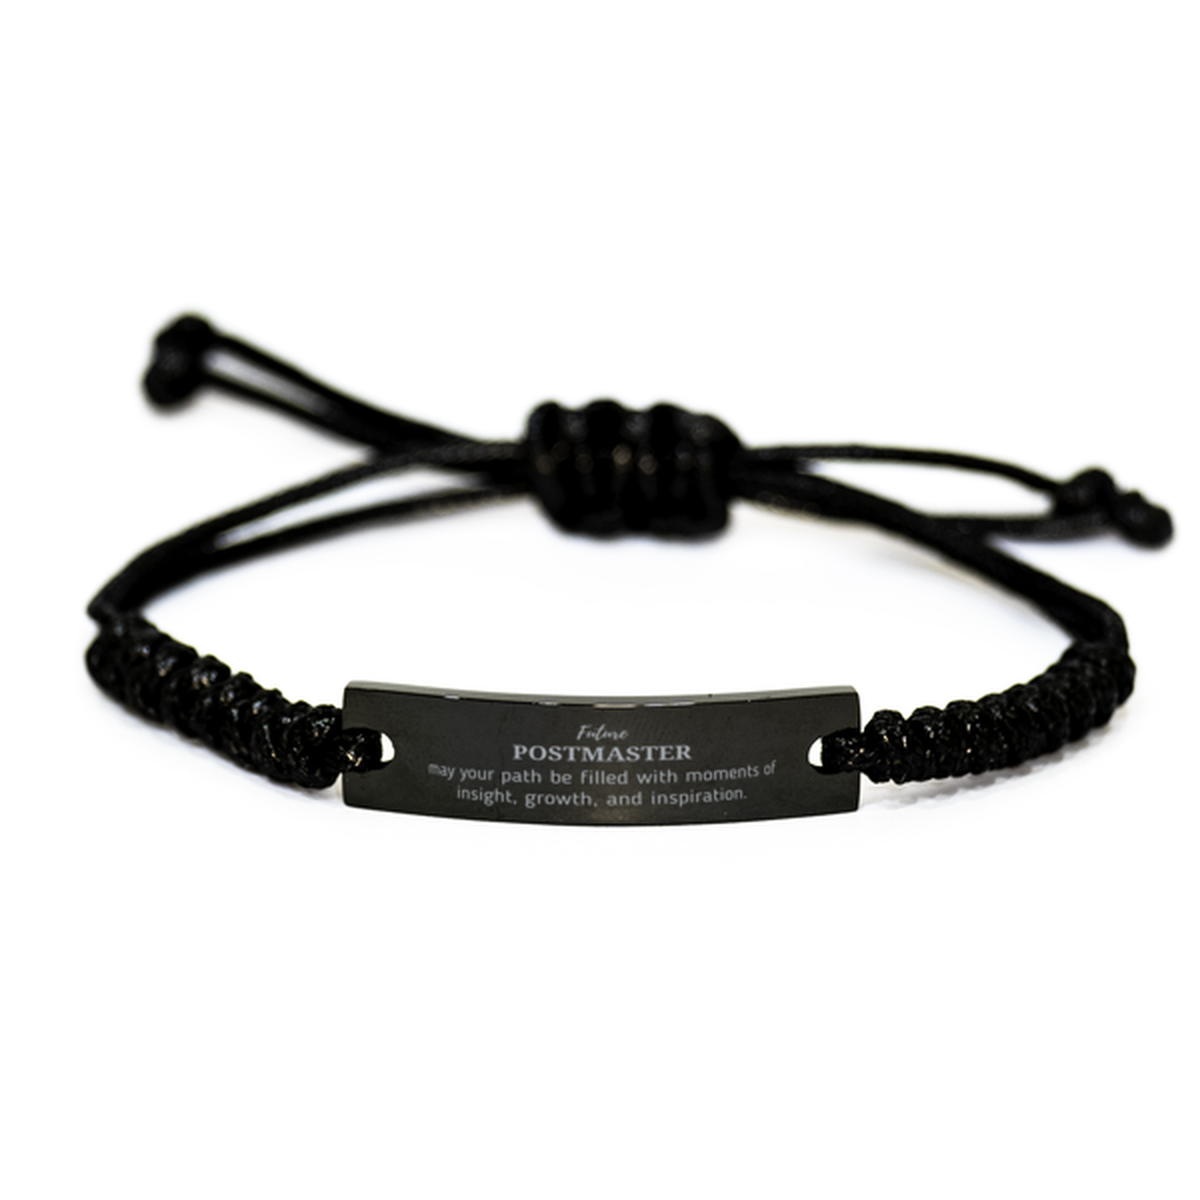 Future Postmaster Gifts, May your path be filled with moments of insight, Graduation Gifts for New Postmaster, Christmas Unique Black Rope Bracelet For Men, Women, Friends